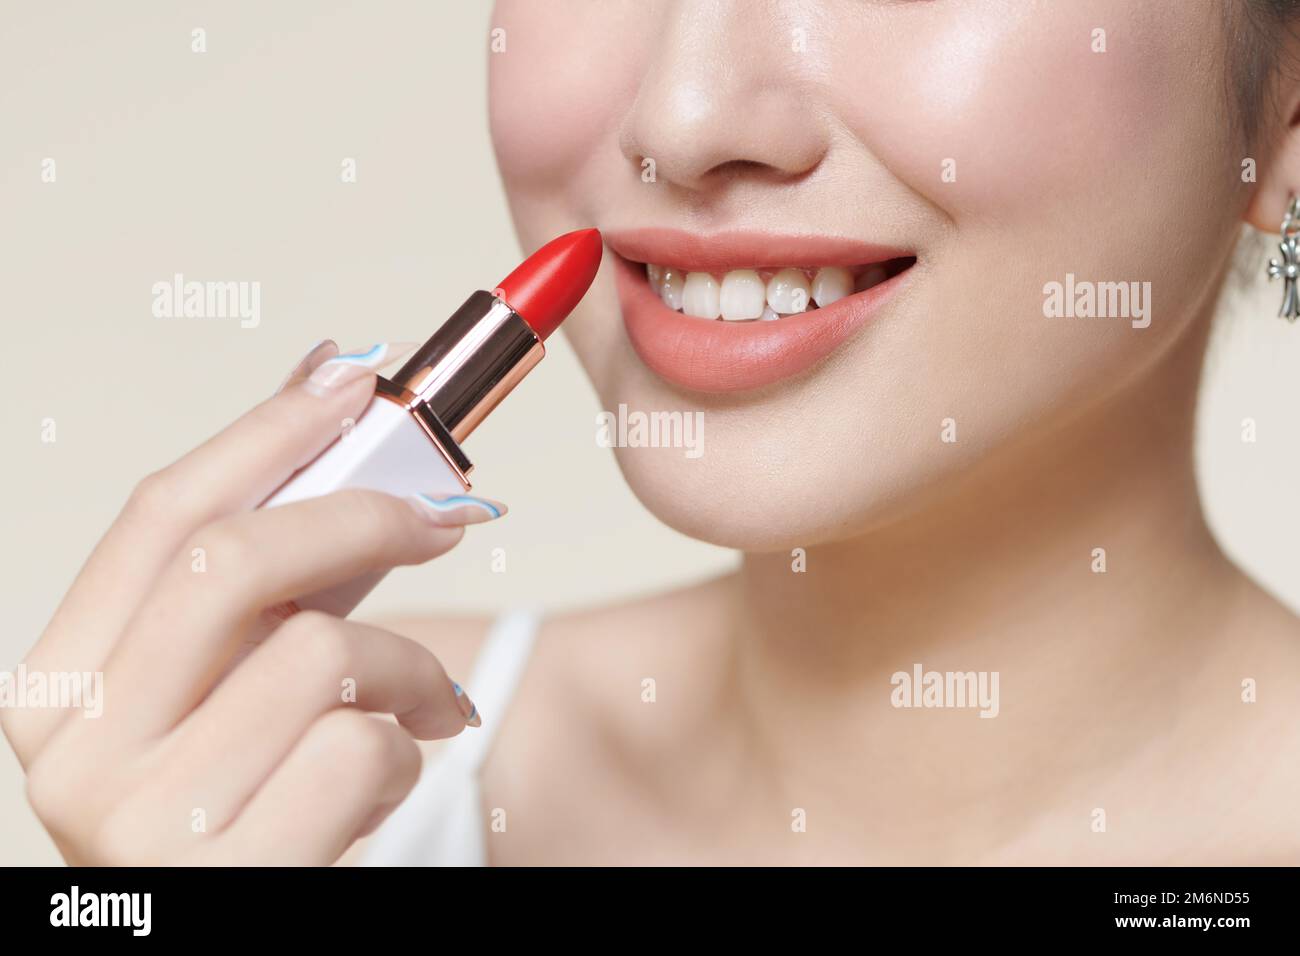 Portrait of gorgeous smiling woman holding red lipstick in hand Stock Photo